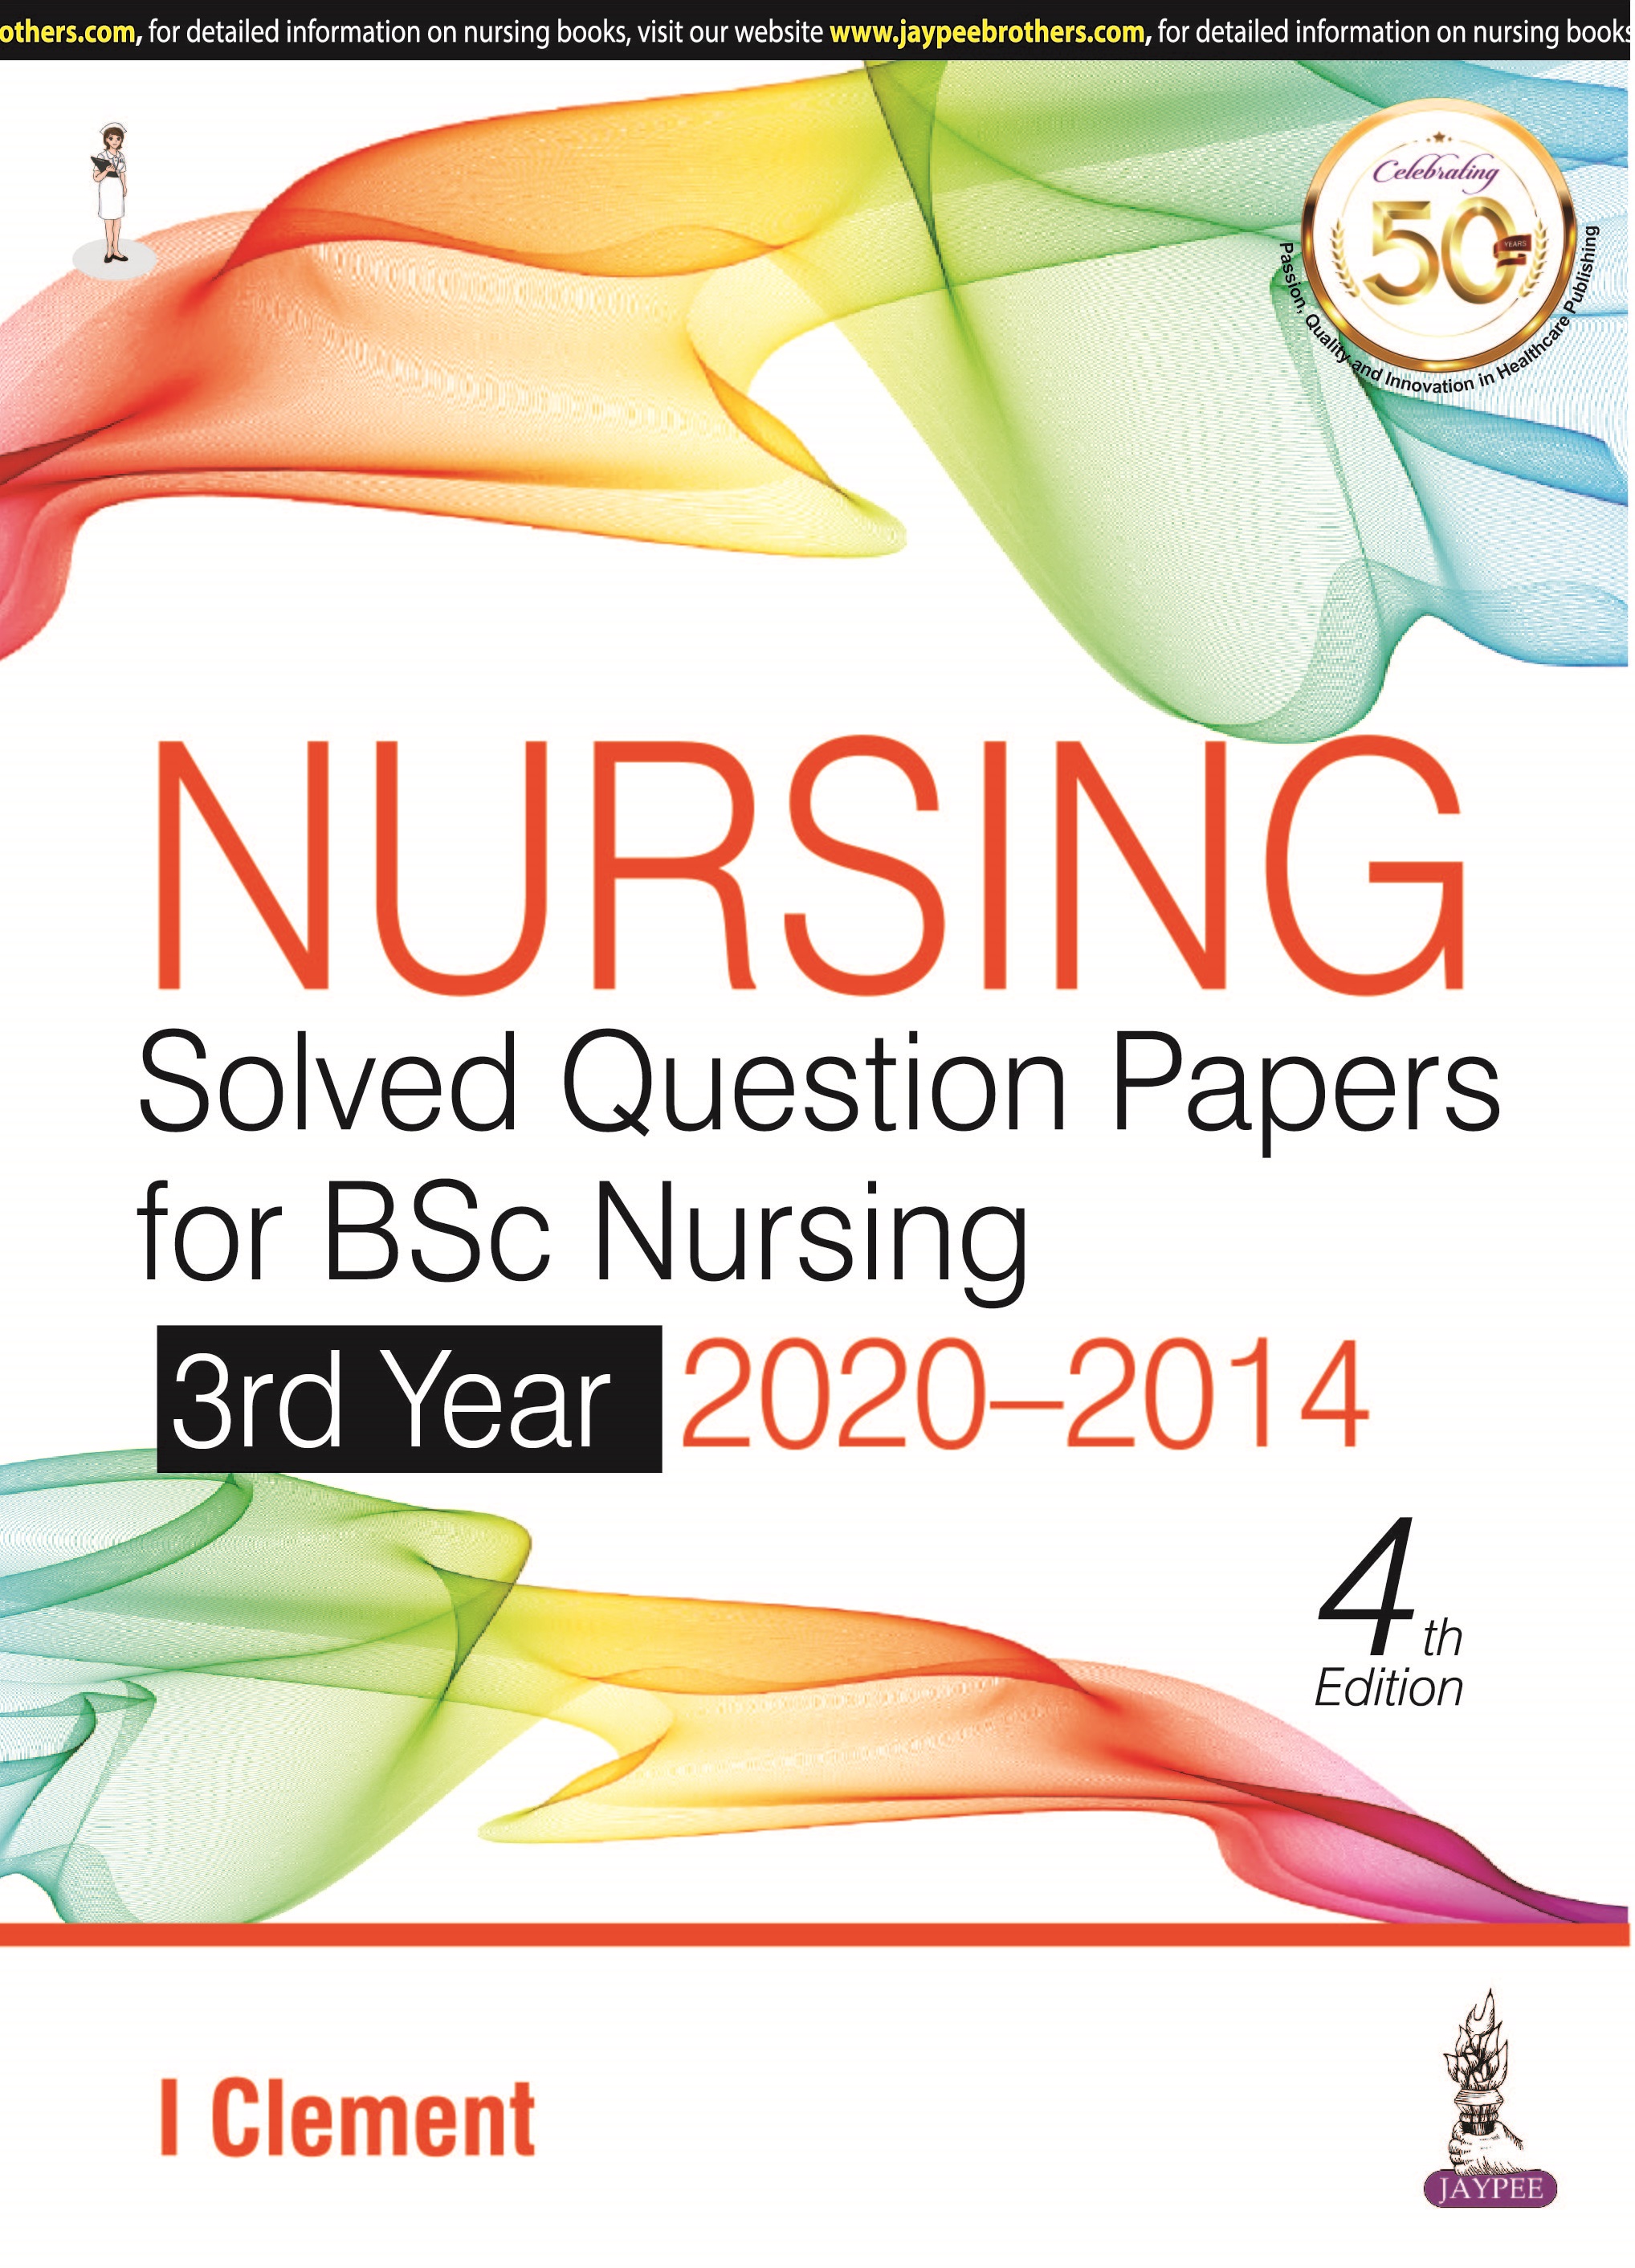 Nursing Solved Question Papers For Bsc Nursing 3Rd Year 2019-2014-4/E -2021